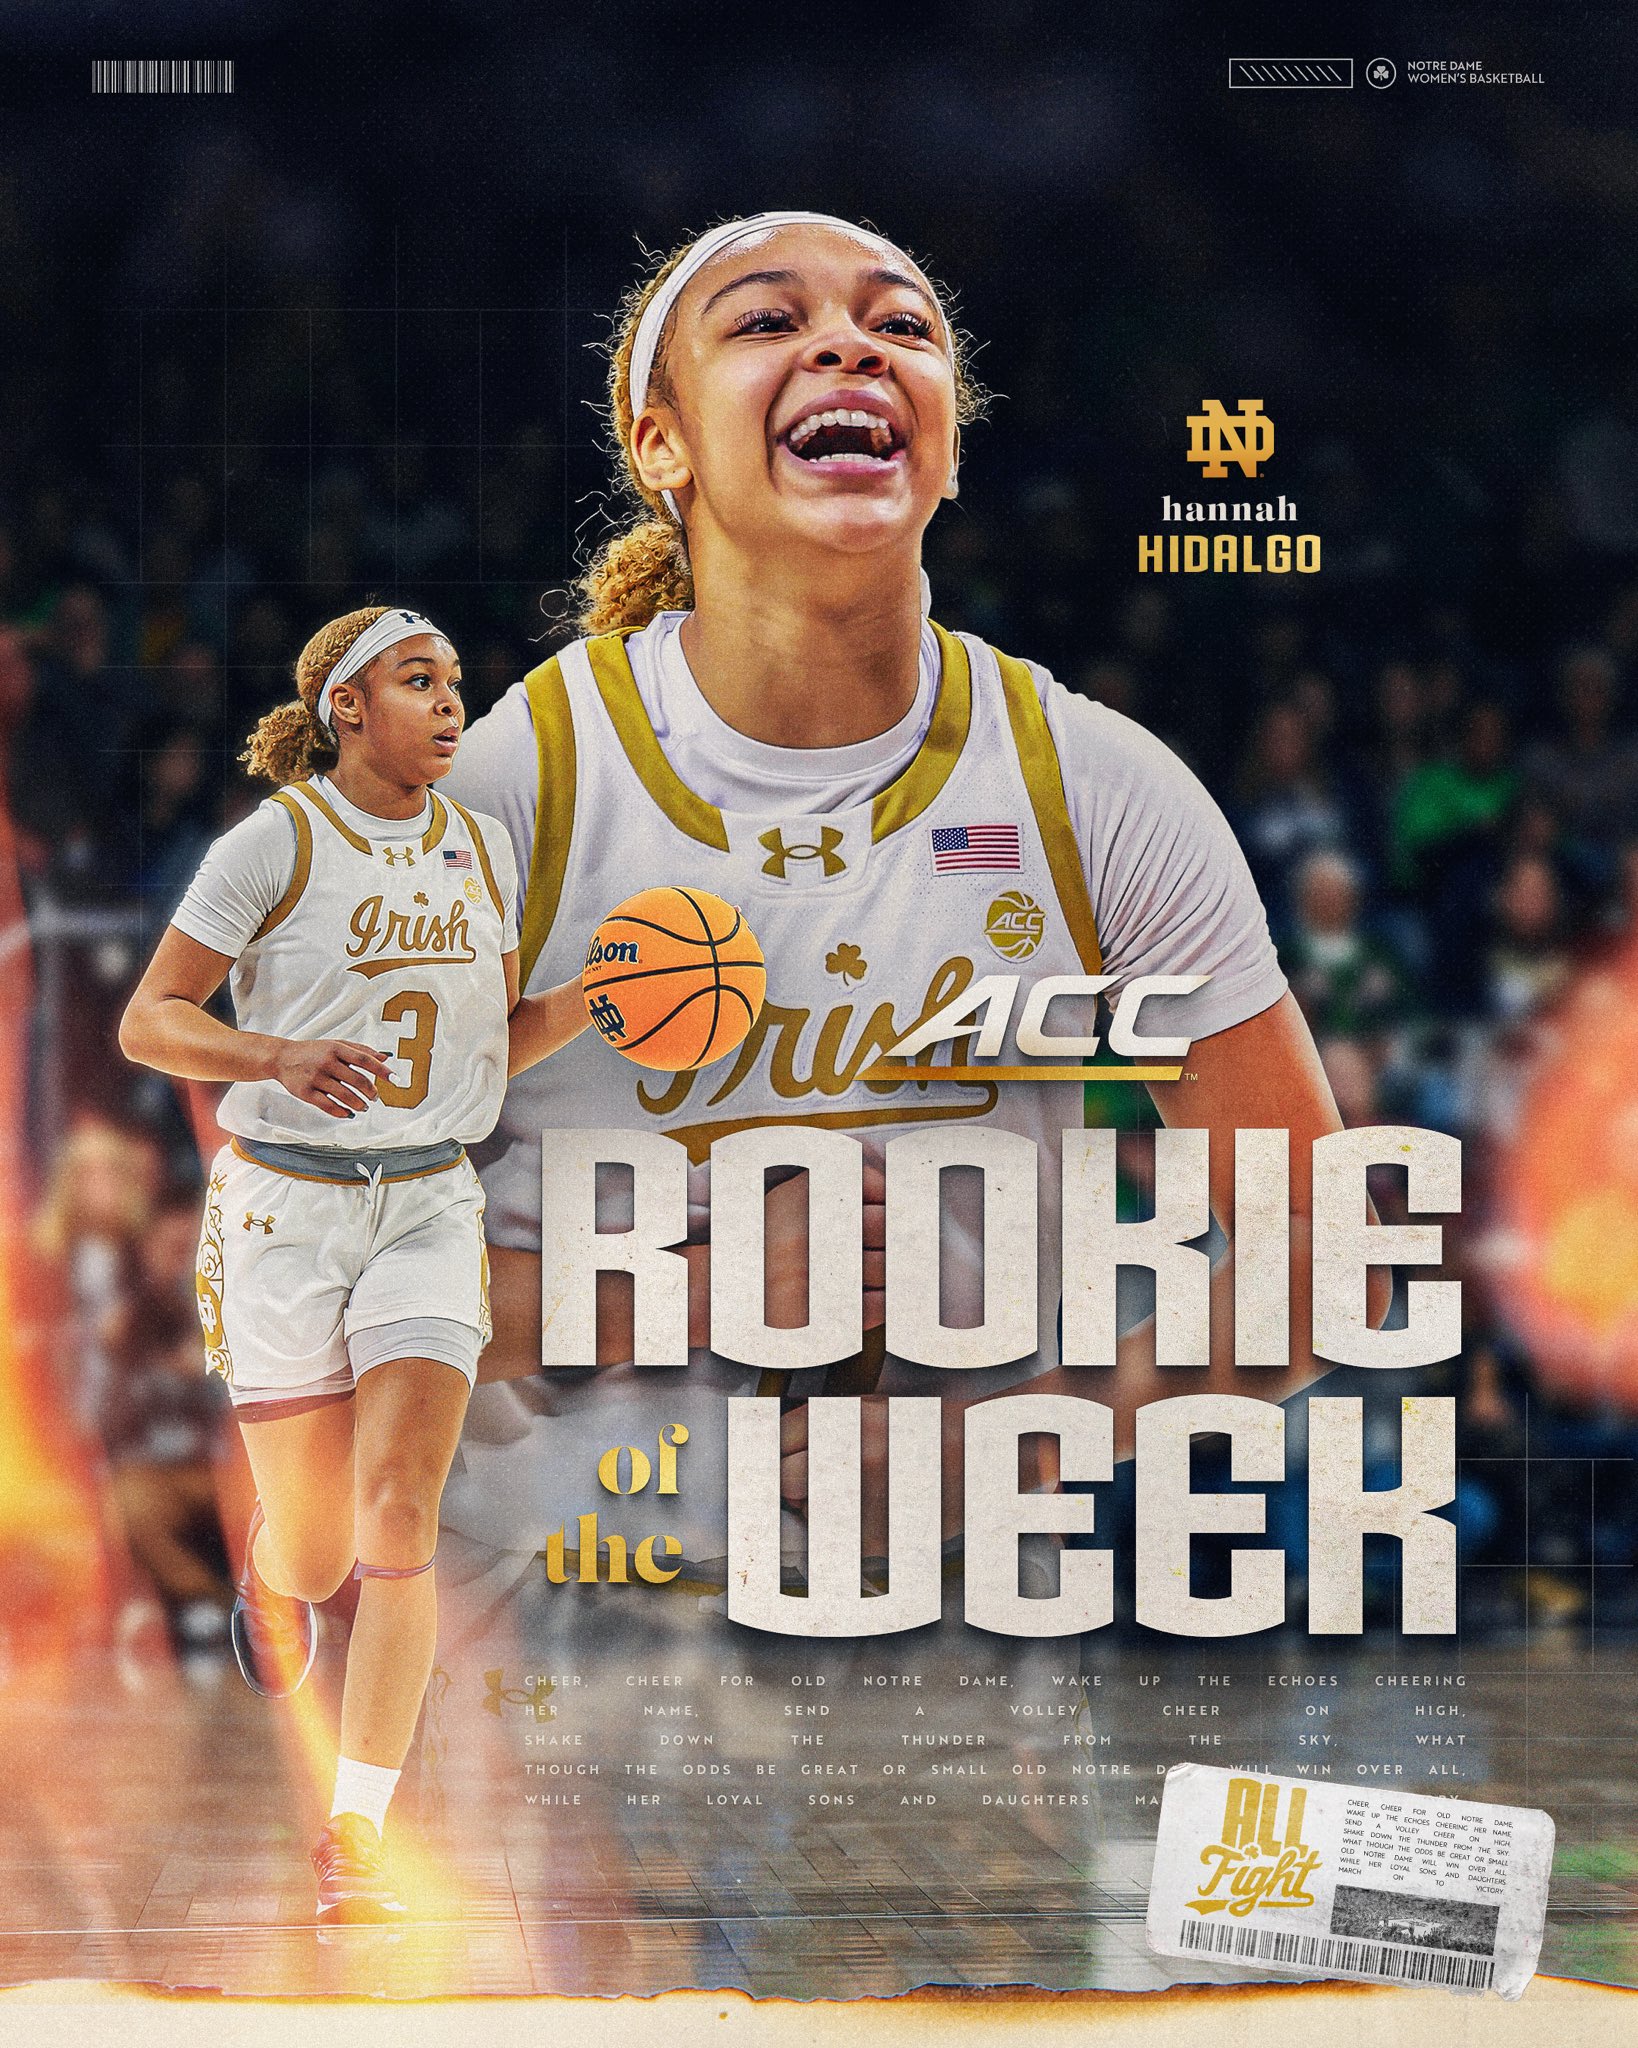 Notre Dame Women's Basketball on X: Sunday at 10:45a.m. join us